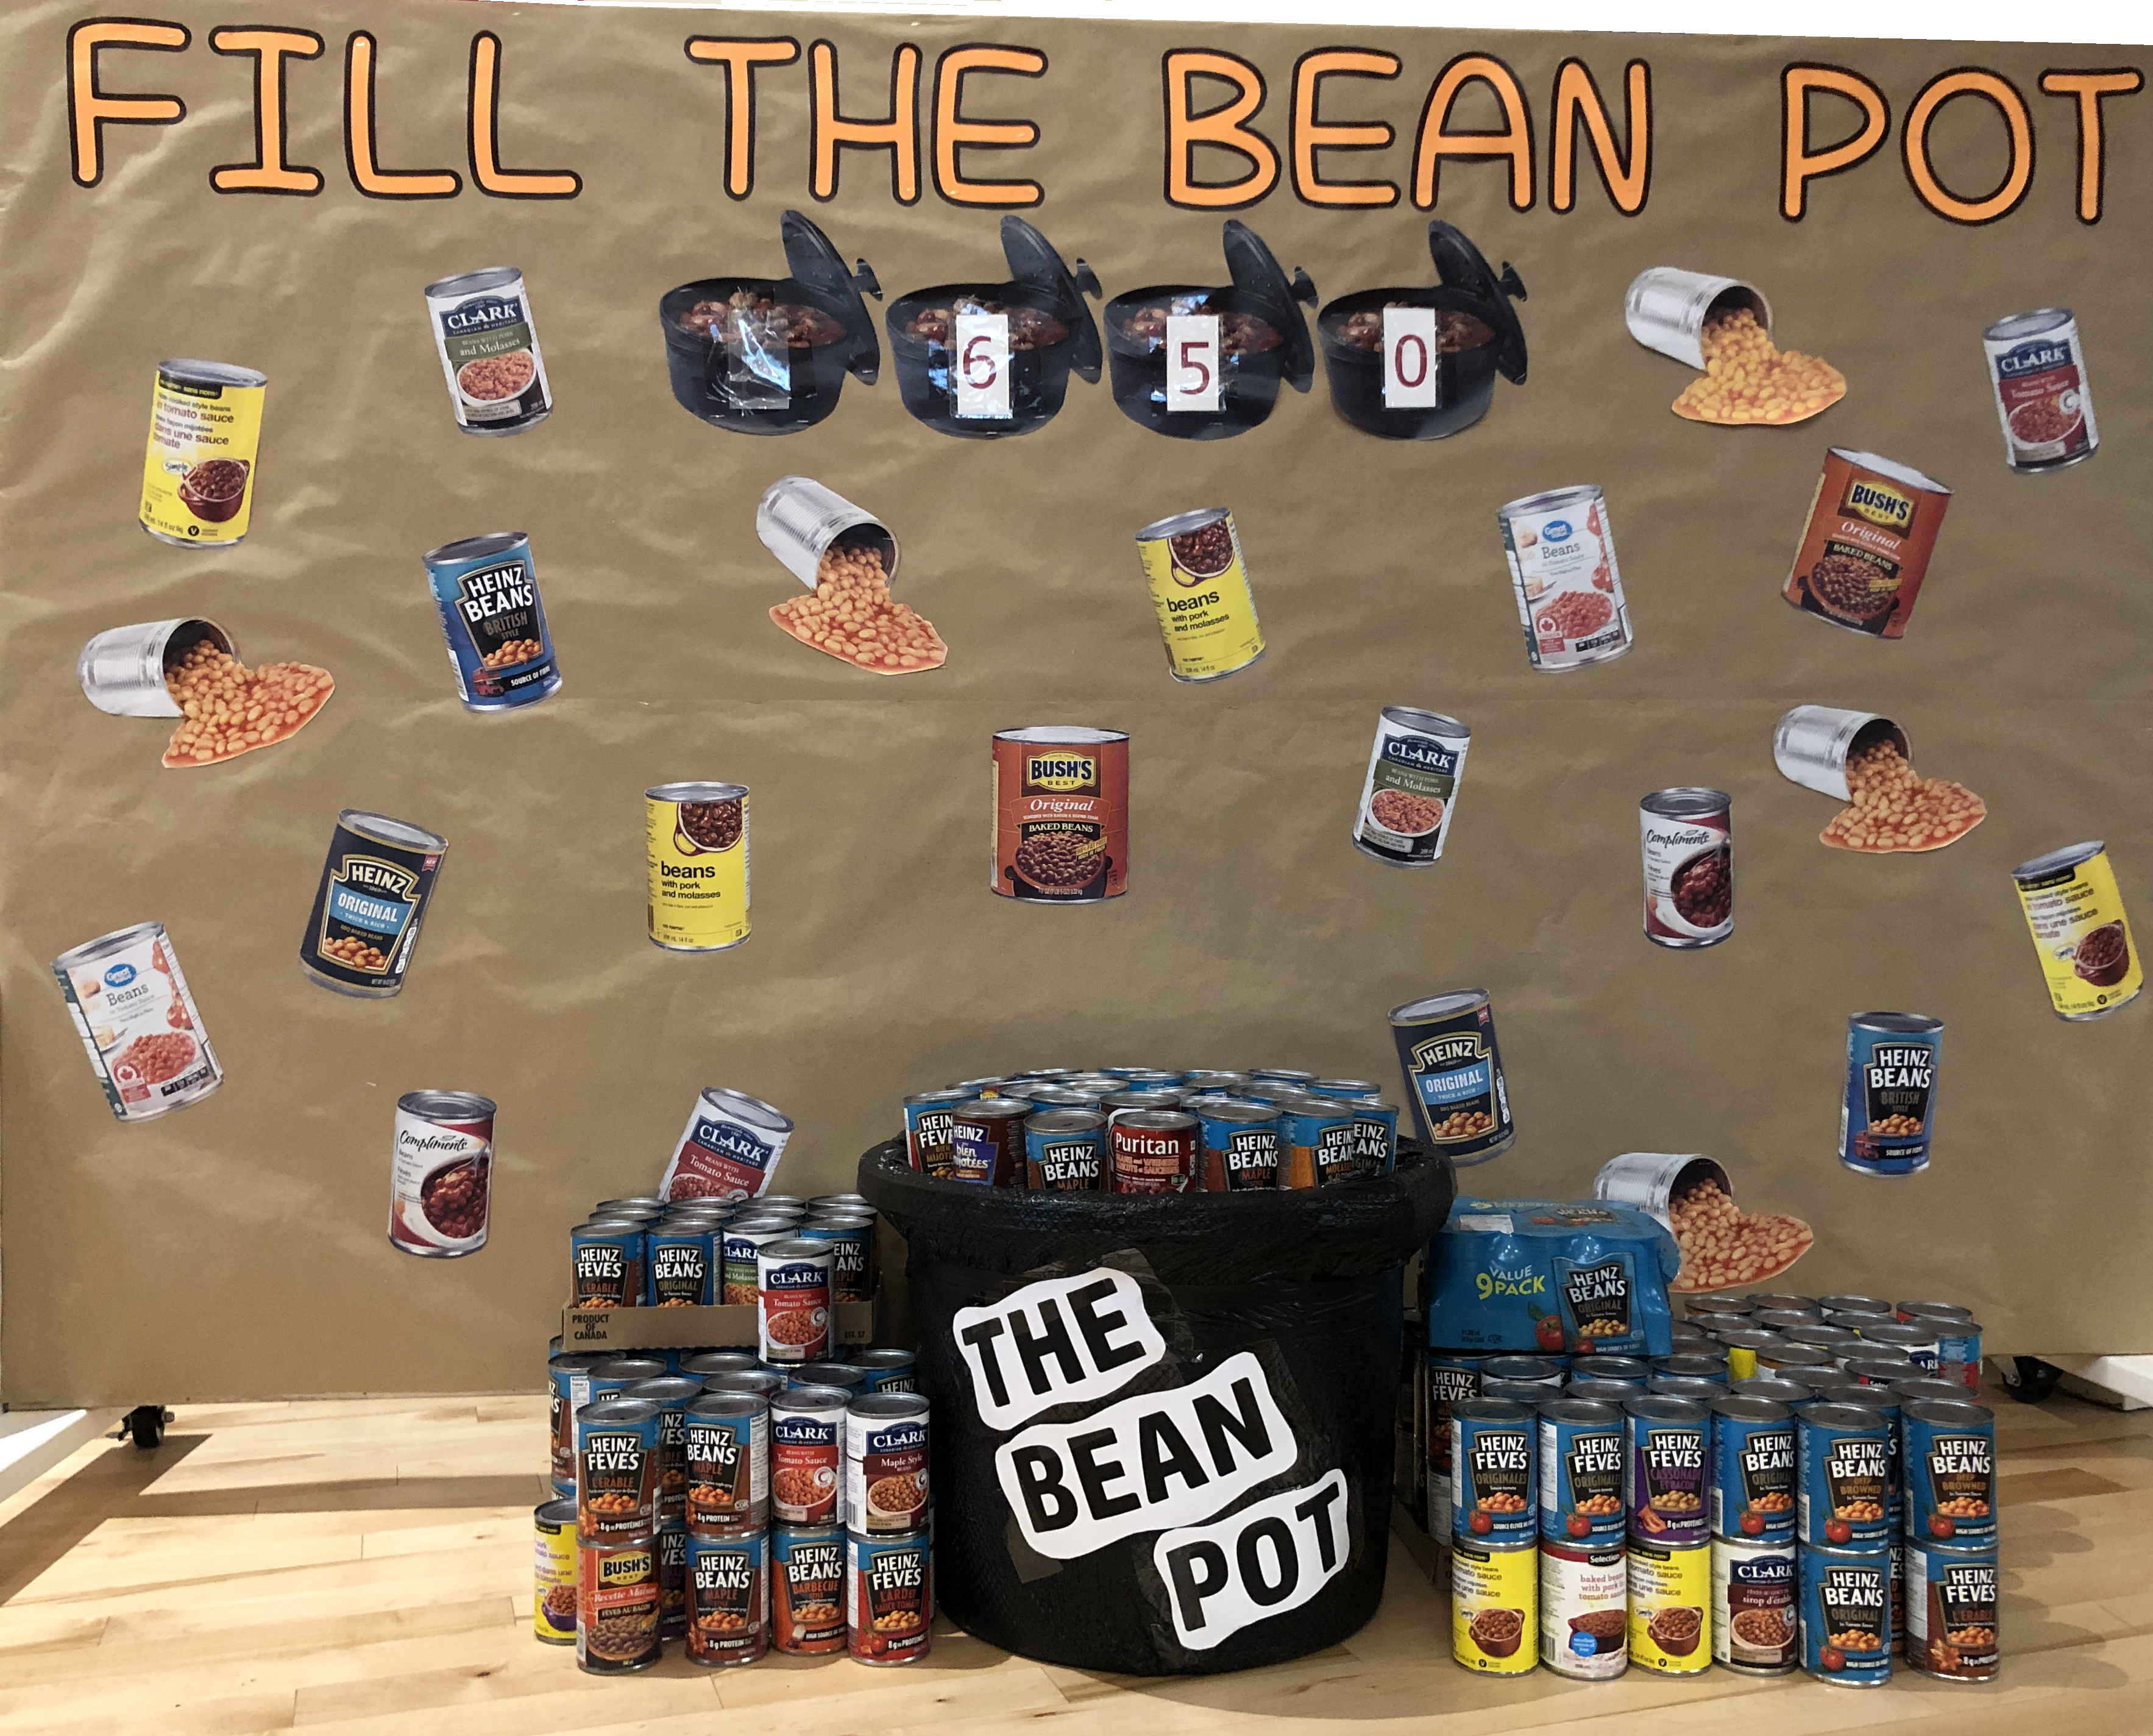 650 cans of beans